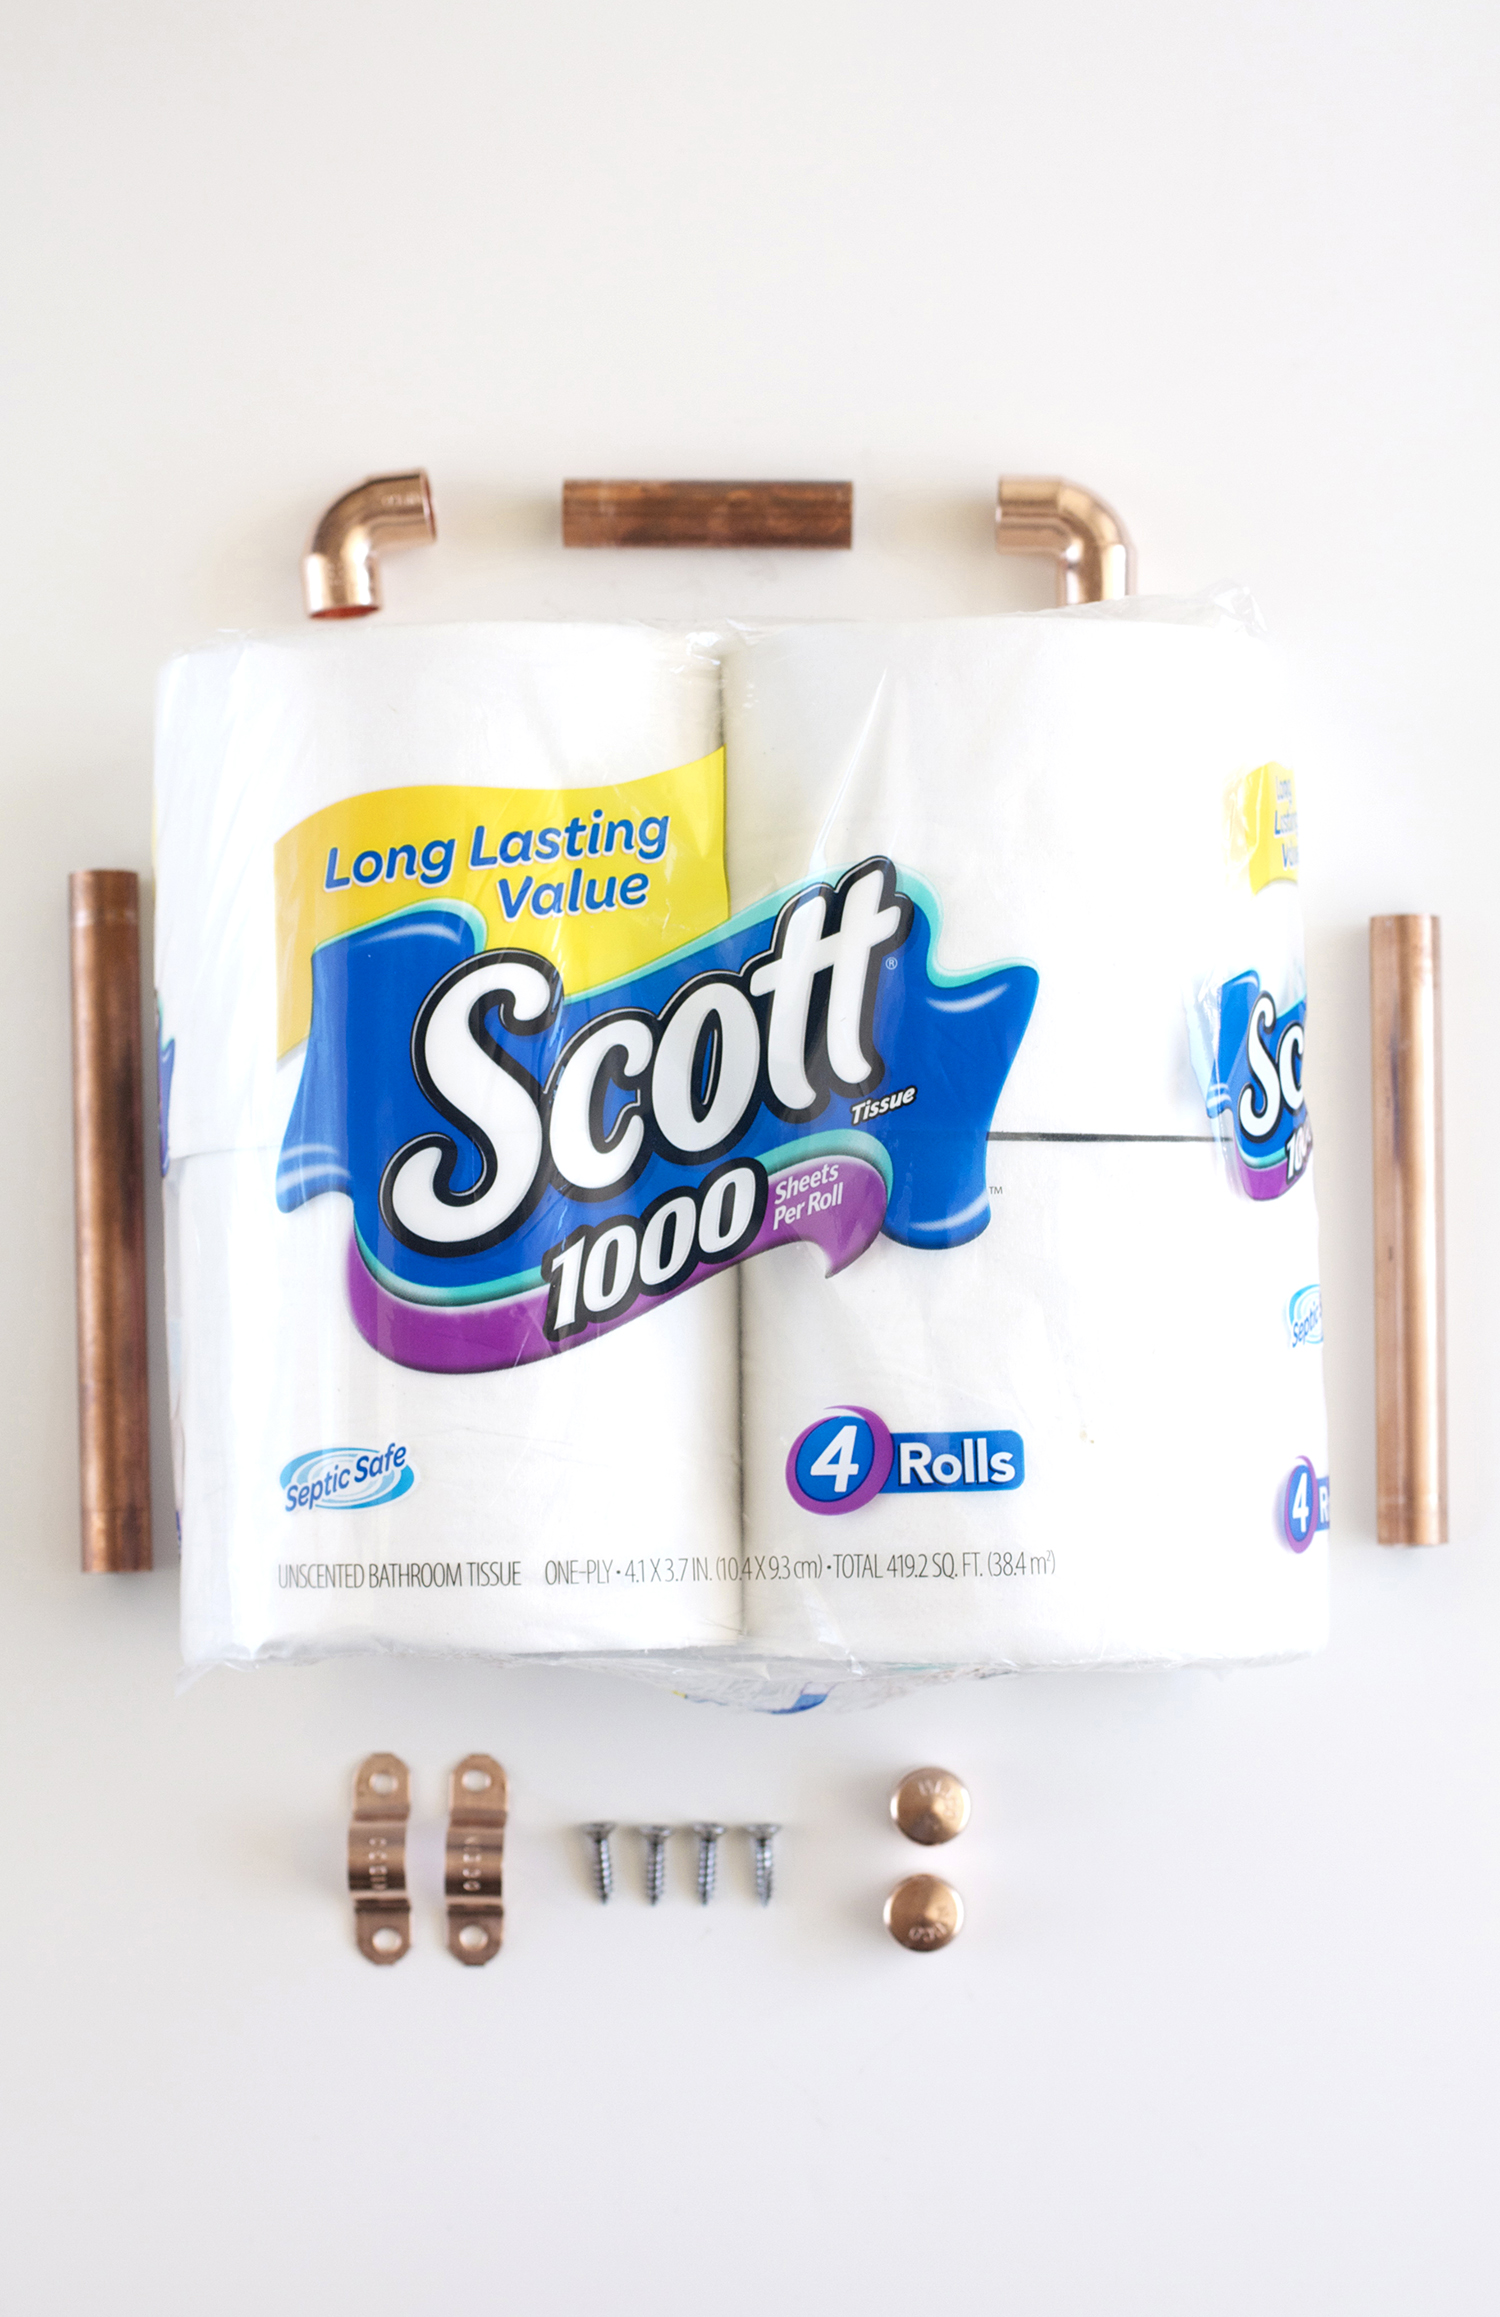 DIY It - Copper Toilet Paper Holders - A Kailo Chic Life